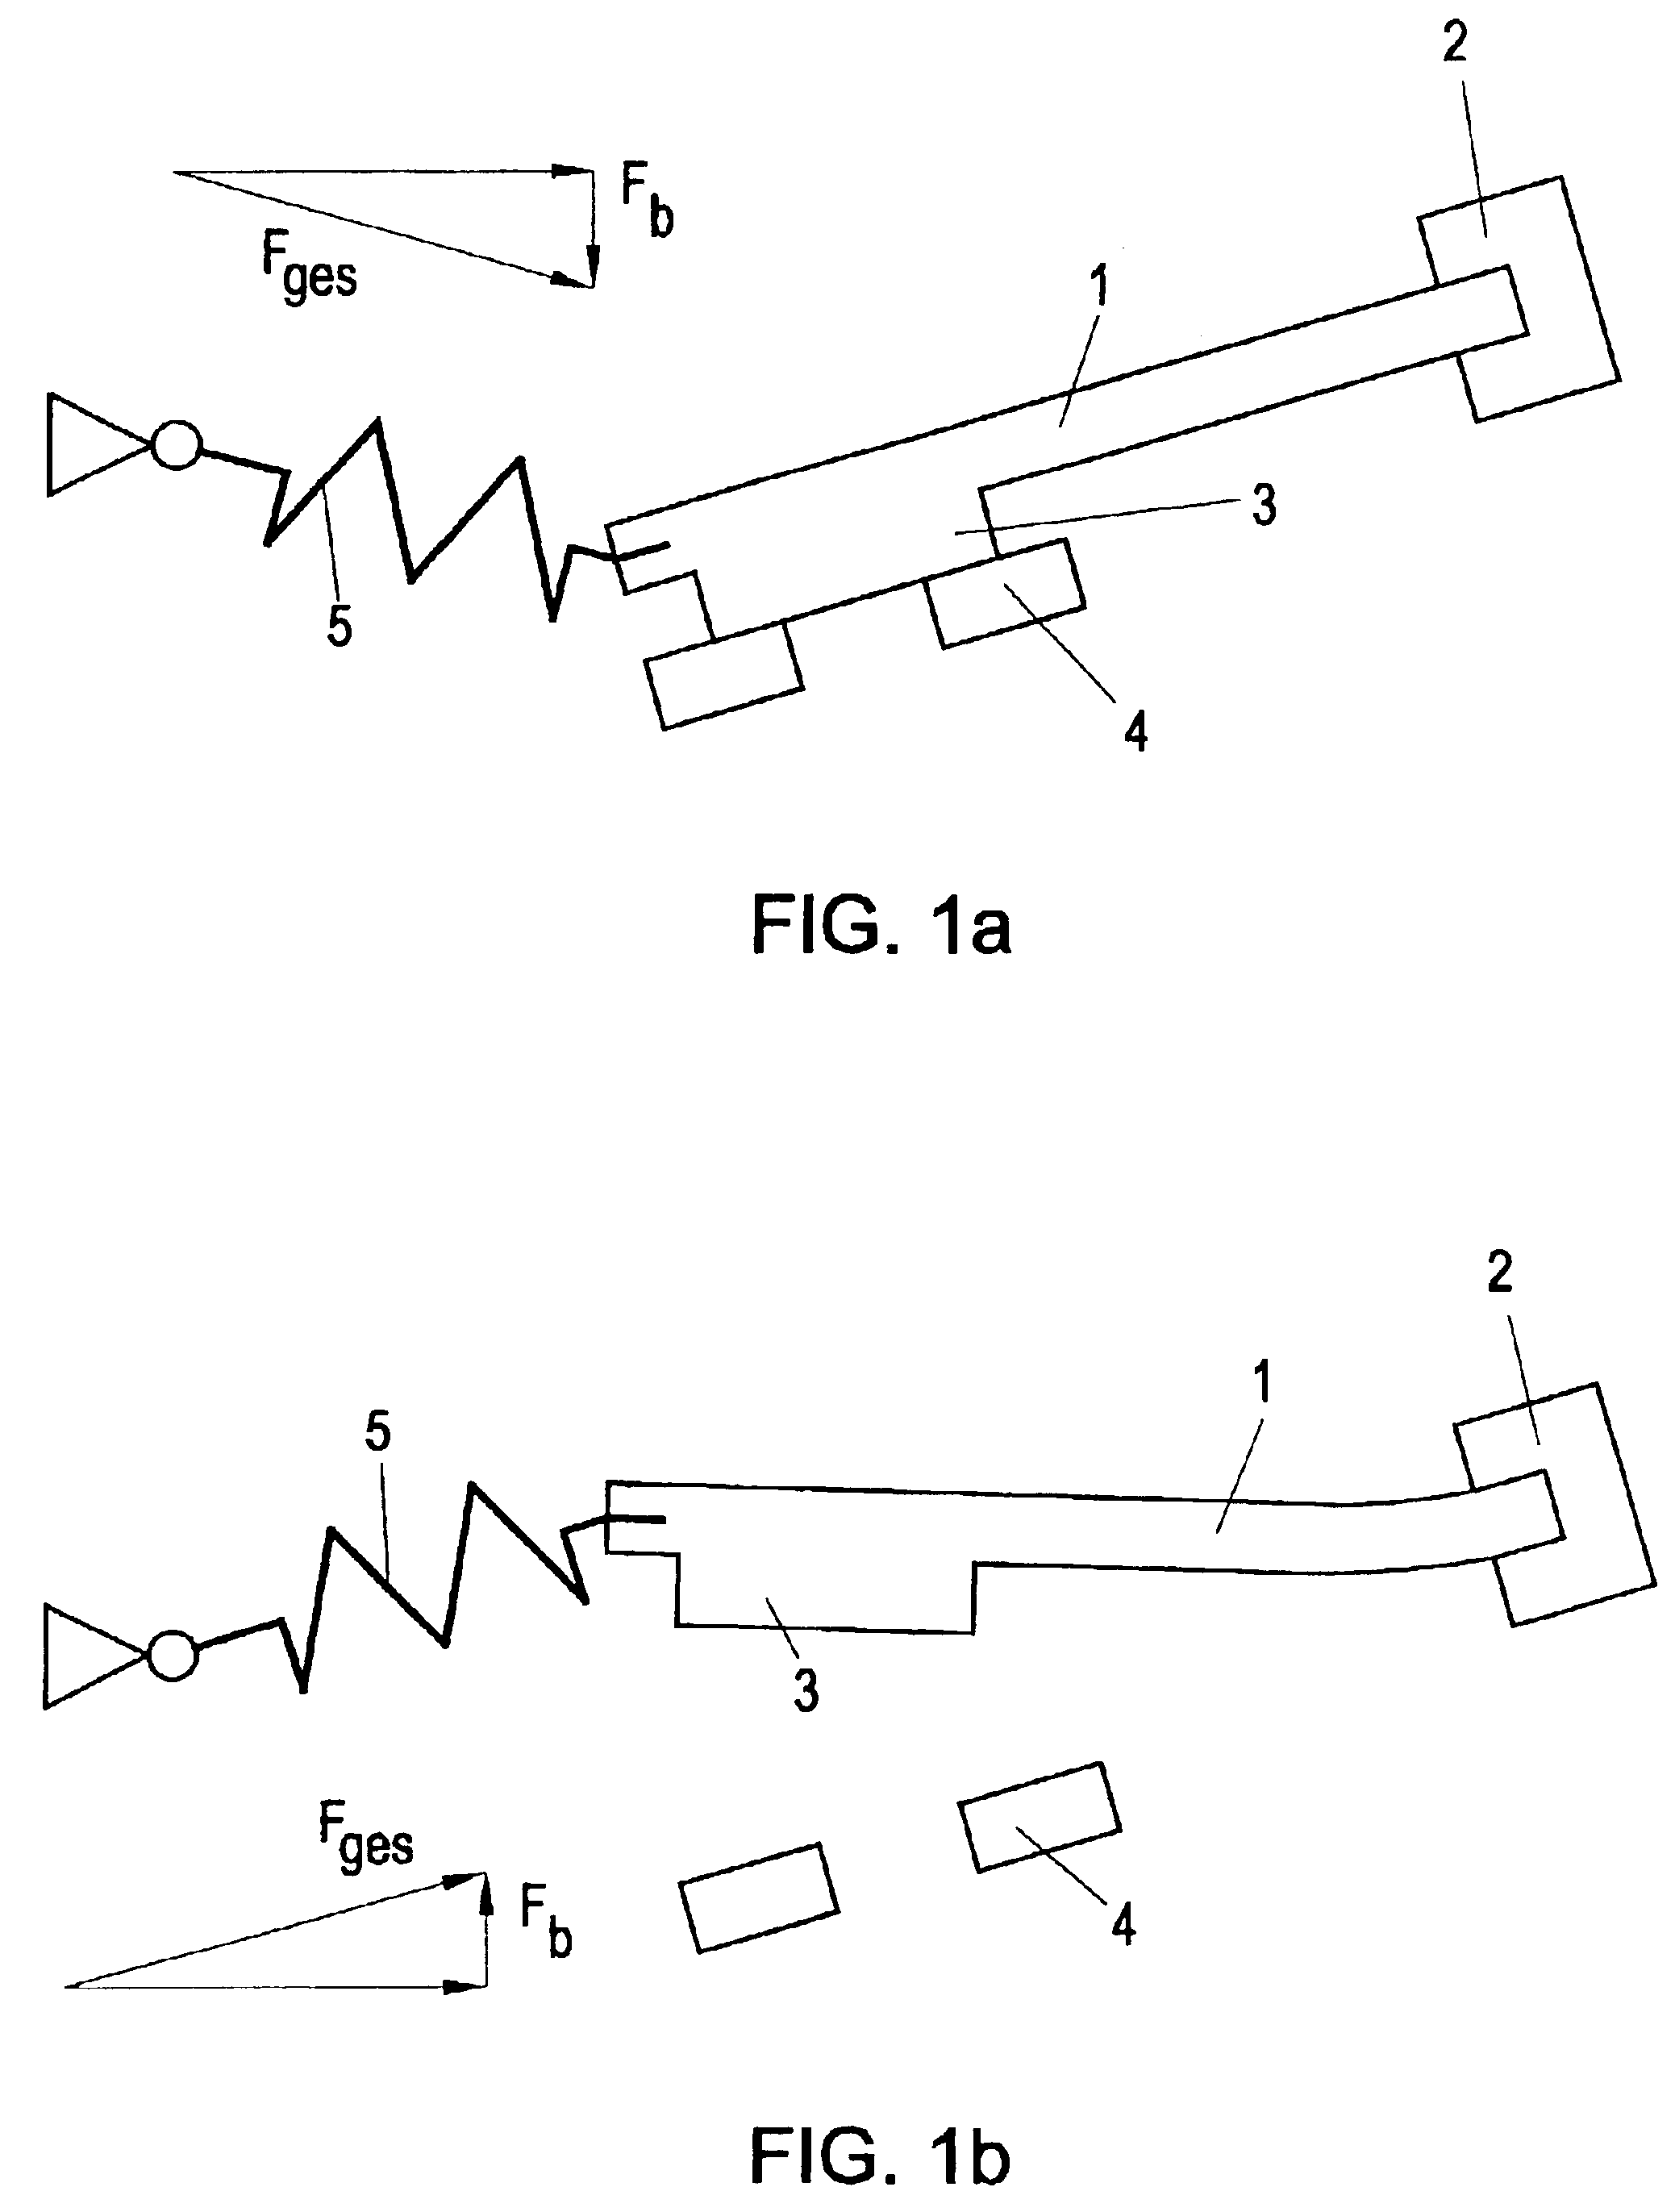 Valve with unilaterally constrained piezoelectric bending element as actuating device